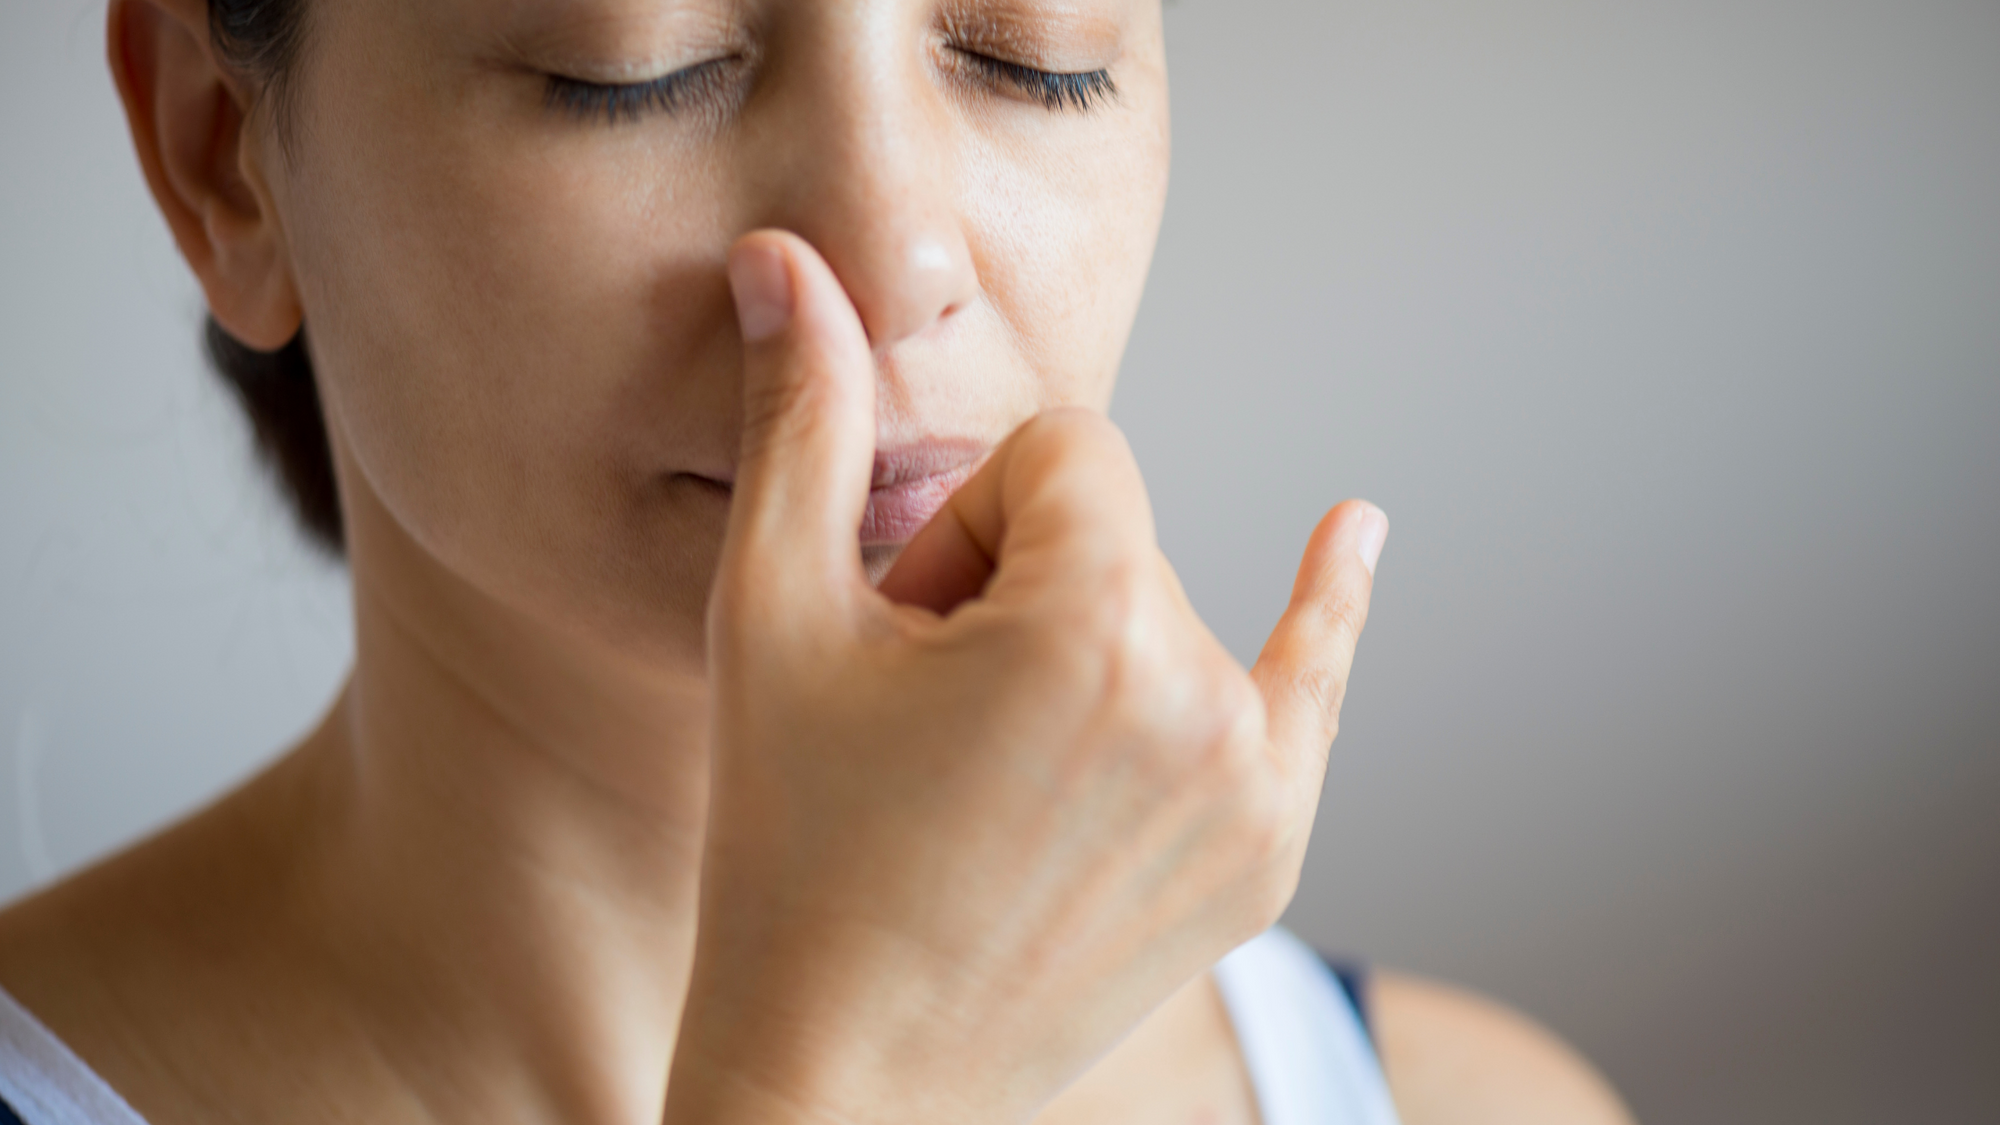 Breathing Exercises to Reduce Blood Pressure